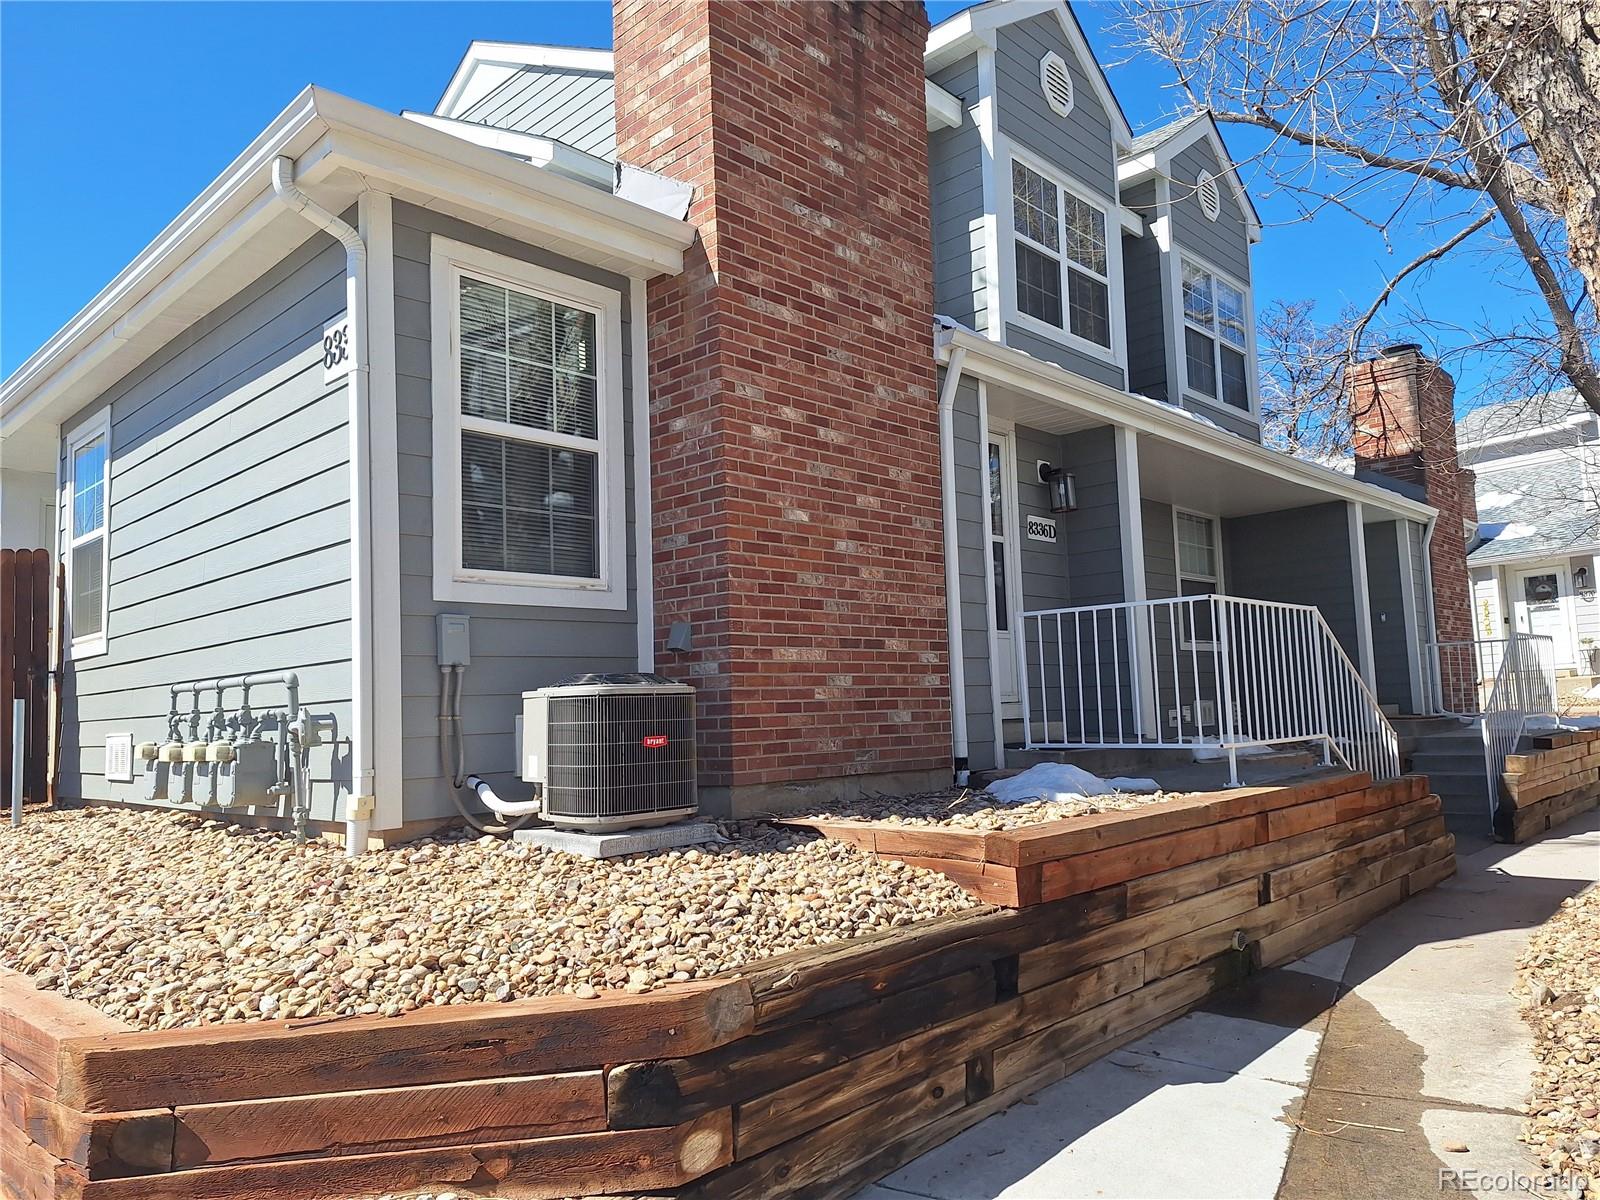 8336 W 87th Drive, arvada MLS: 2650336 Beds: 2 Baths: 2 Price: $399,500